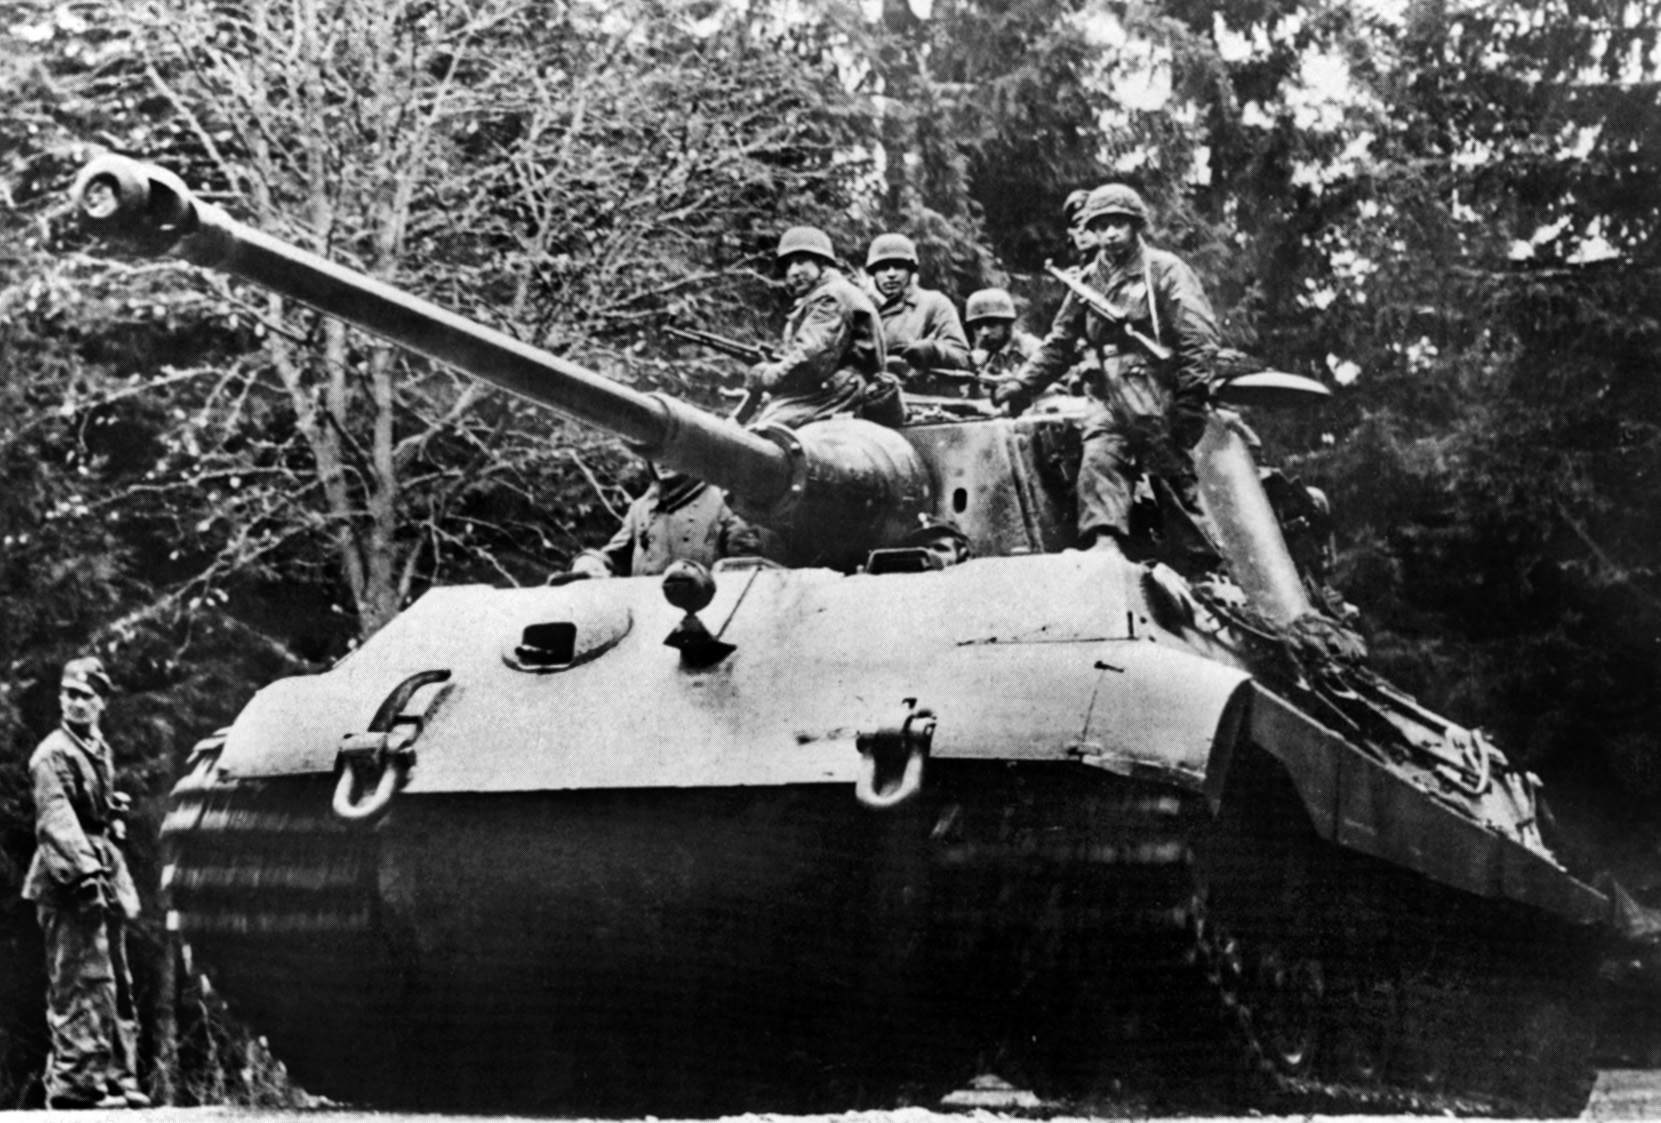 German parachutists ride aboard a massive Tiger II tank, one of hundreds used during the Battle of the Bulge.